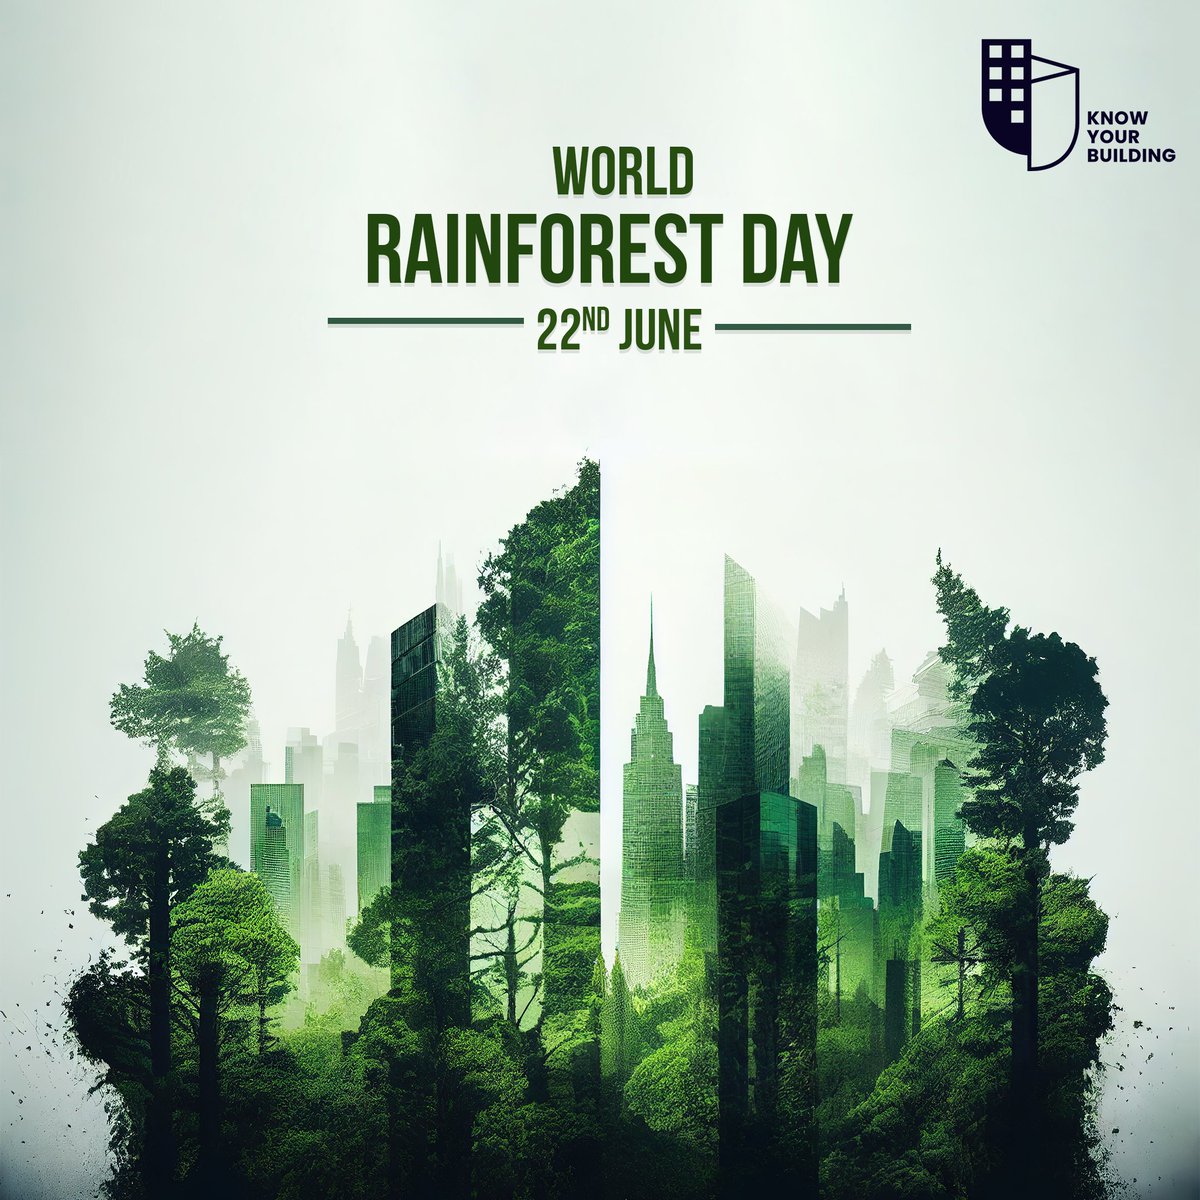 Happy #WorldRainforestDay! Let's celebrate the breathtaking beauty and vital importance of our planet's lush #rainforests today and every day.

#KnowYourBuilding #Sustainability #PreserveOurPlanet #WirelessBMS #GreenTech #Proptech #WirelessBuildingManagementSystem